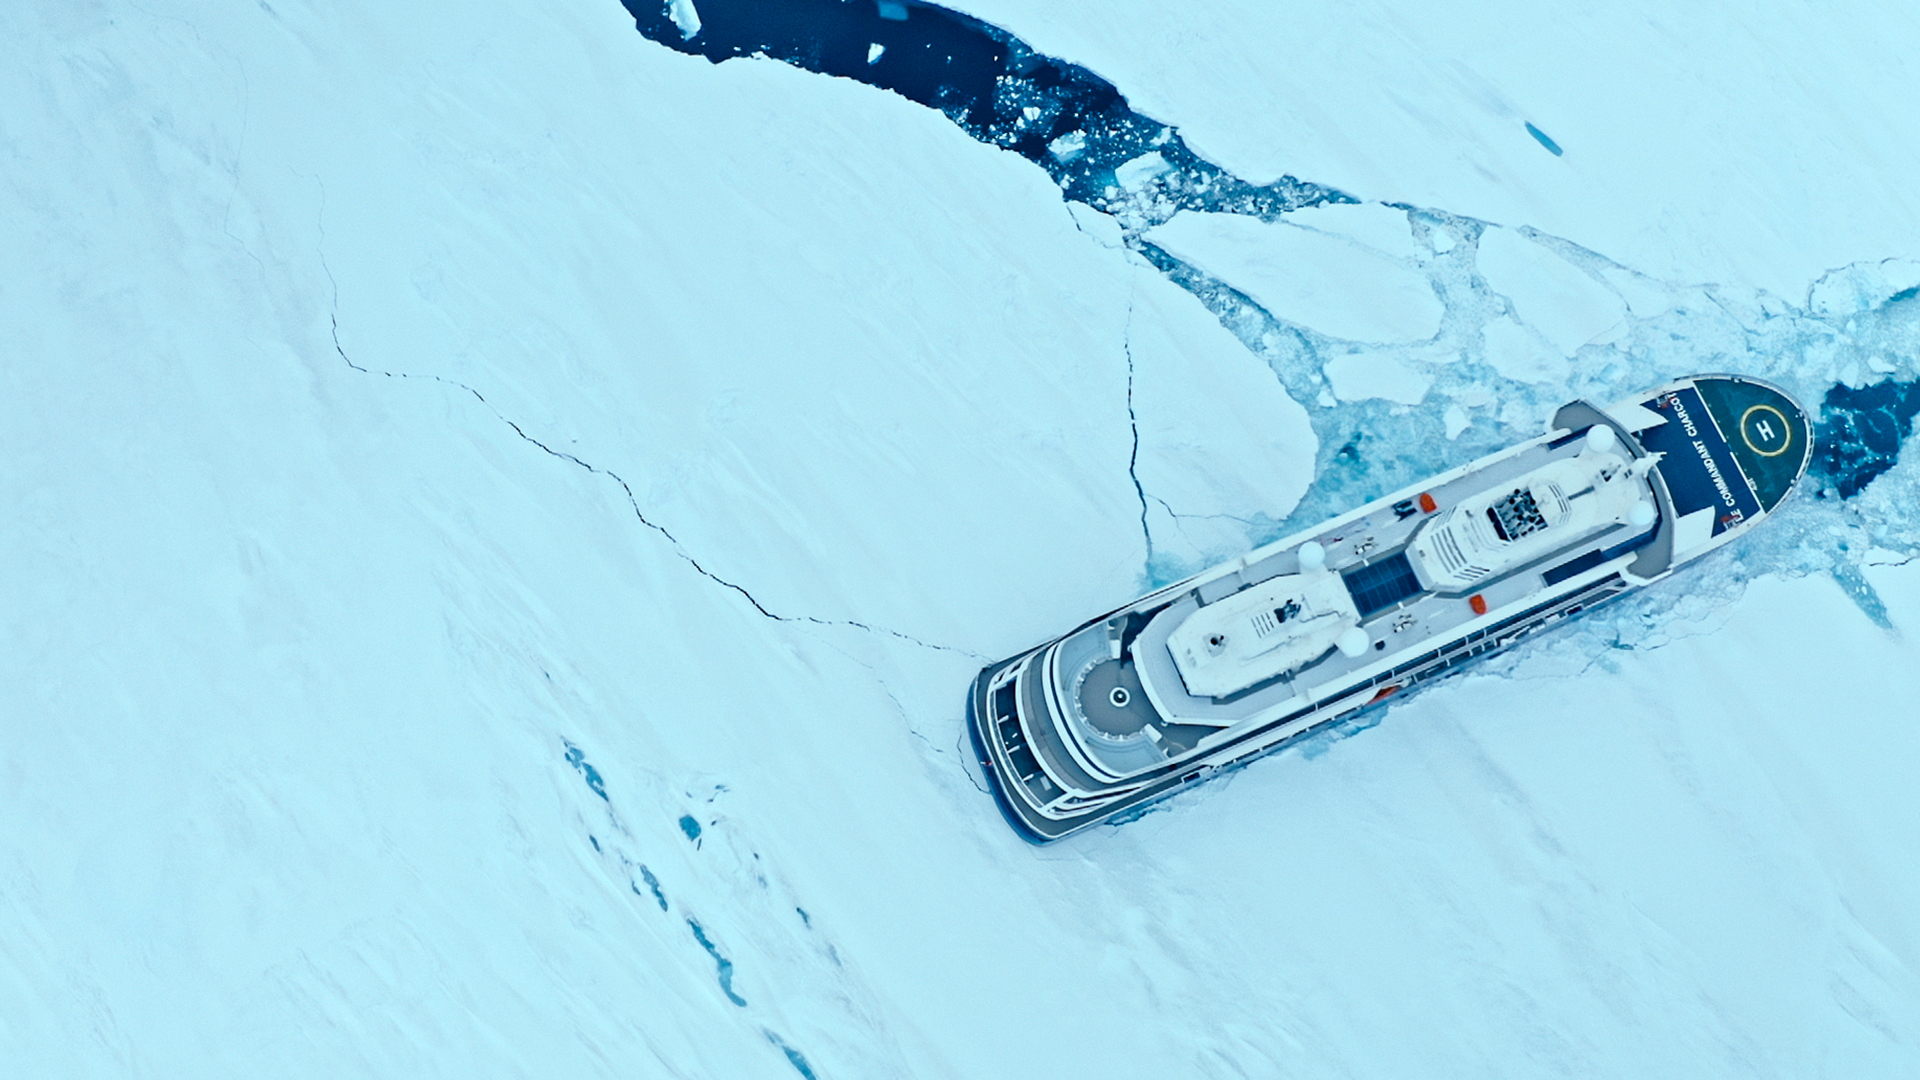 Commander Charcot in Antarctica. This is from Megastructures: Icebreaker [Photo of the day - June 2022]